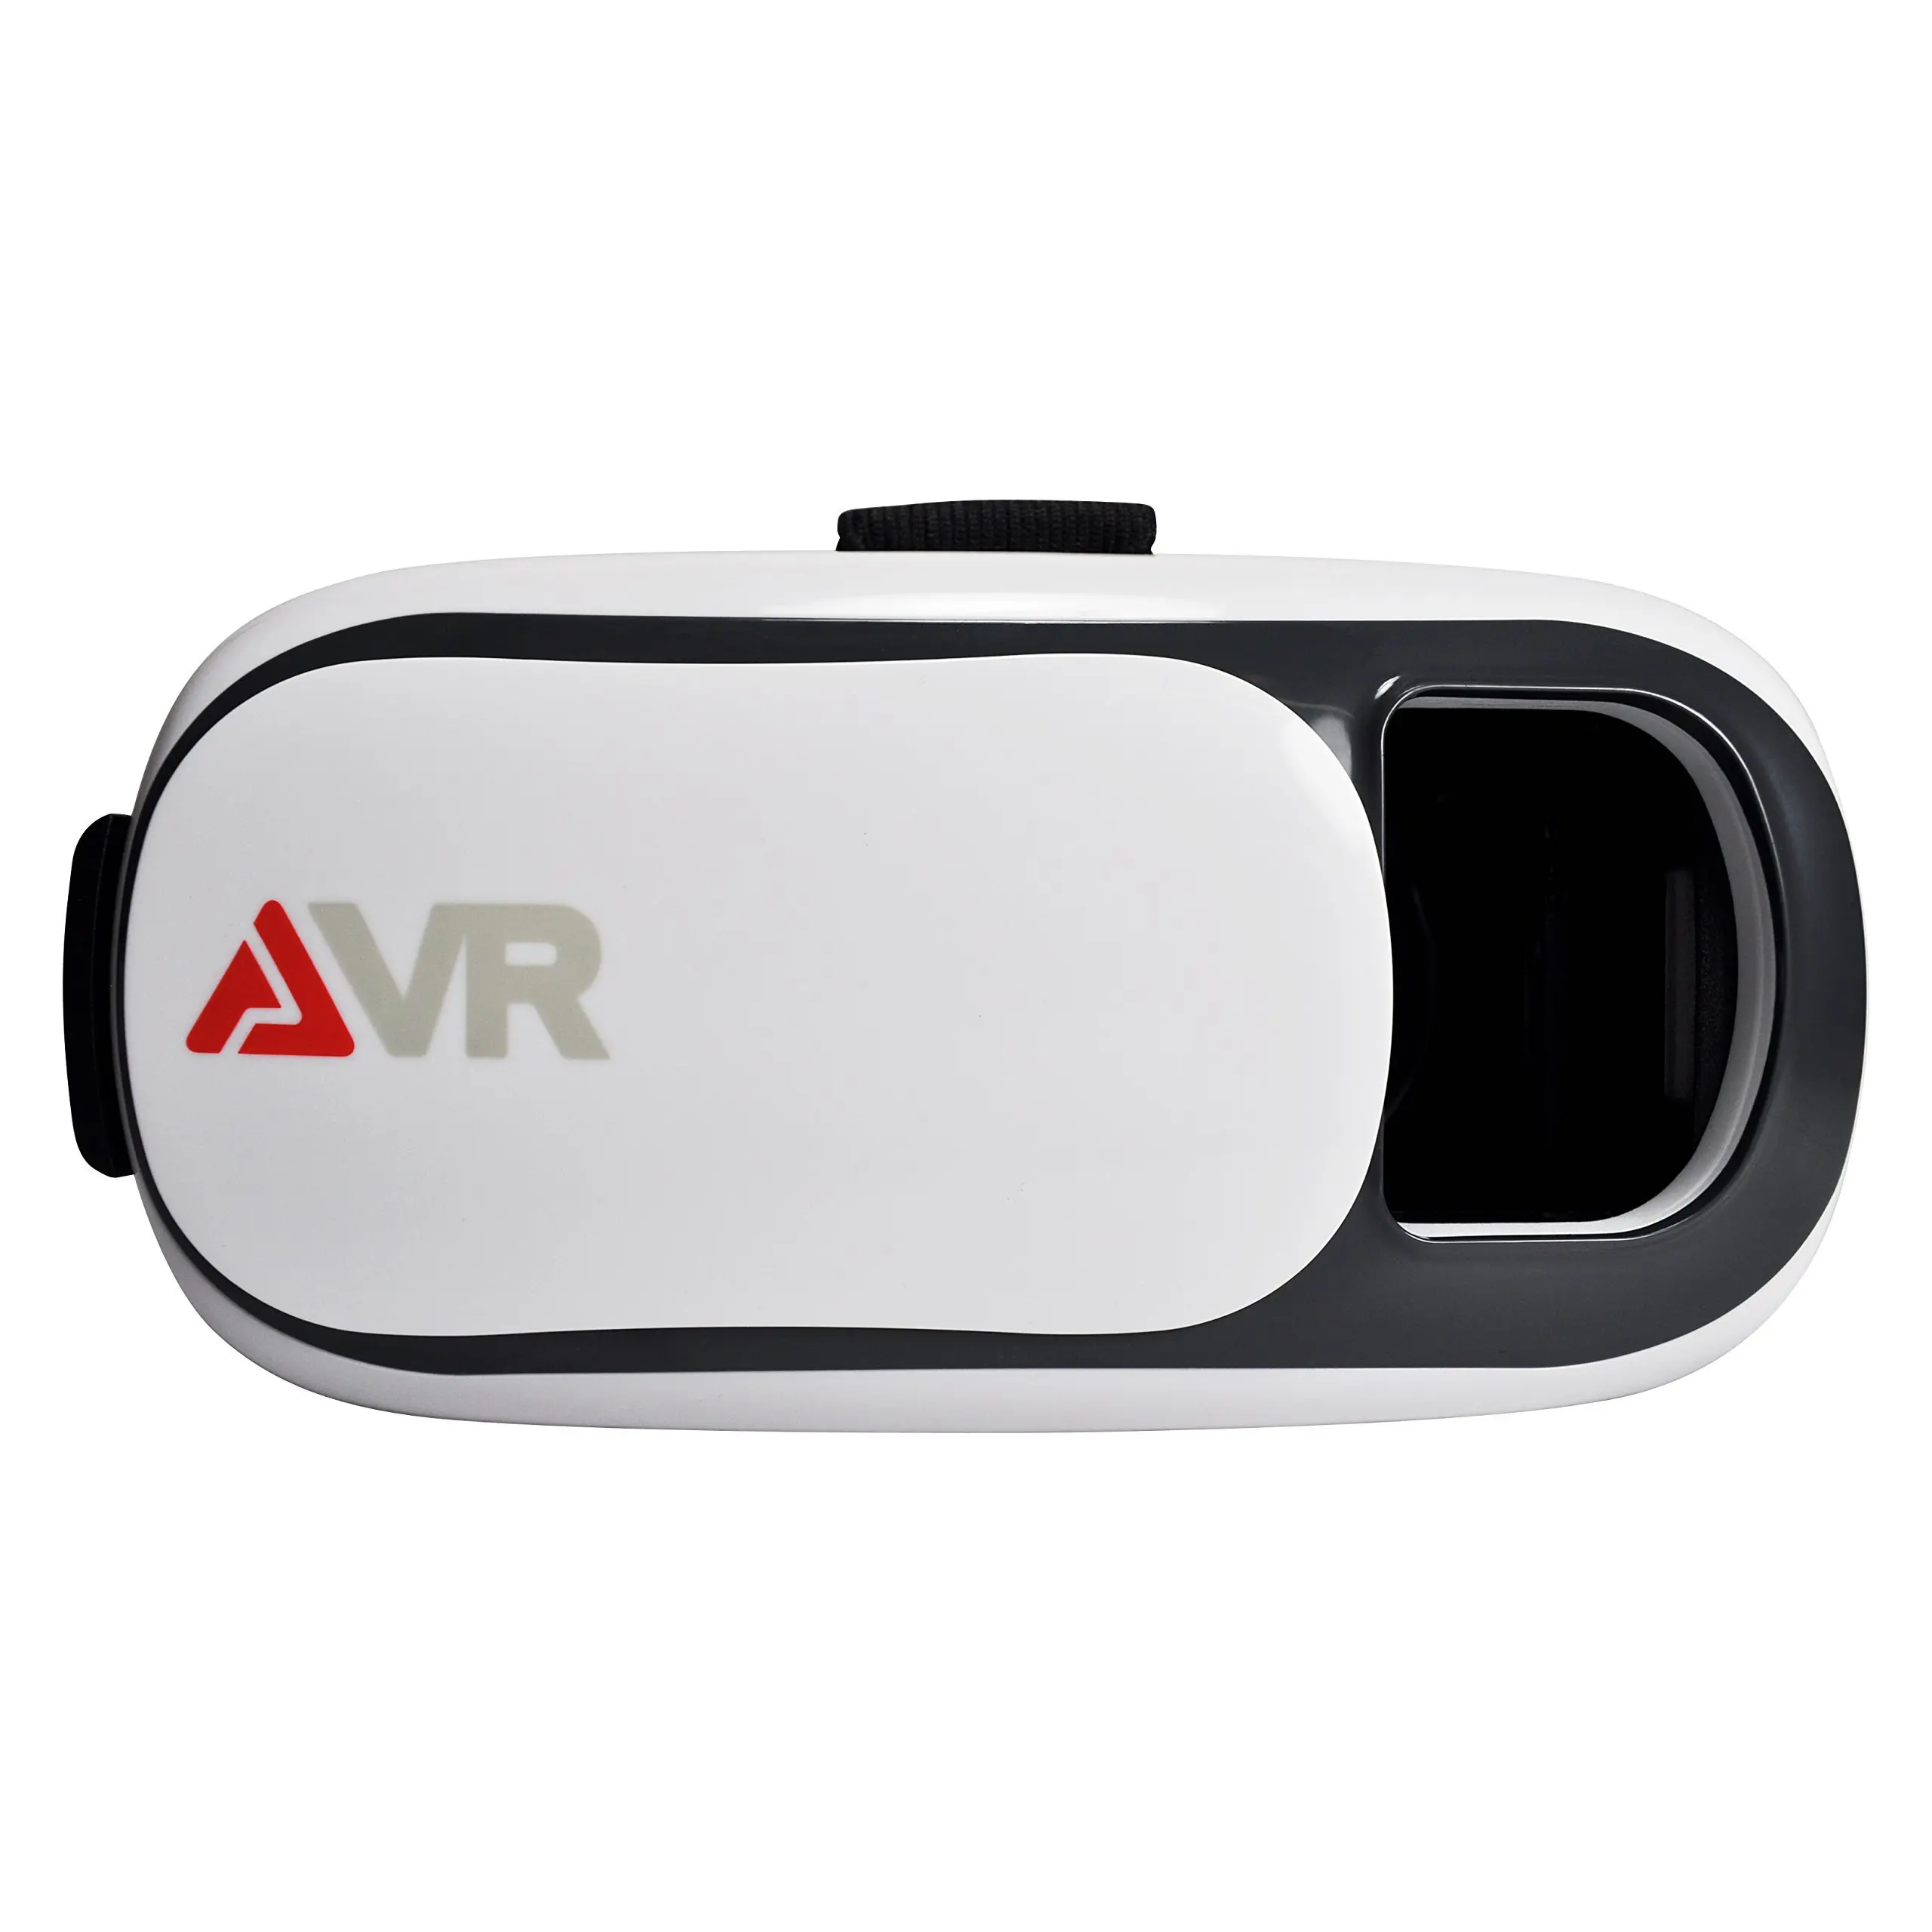 Buy Audio Council 360 Degree Viewing Immersive Virtual Reality Headset